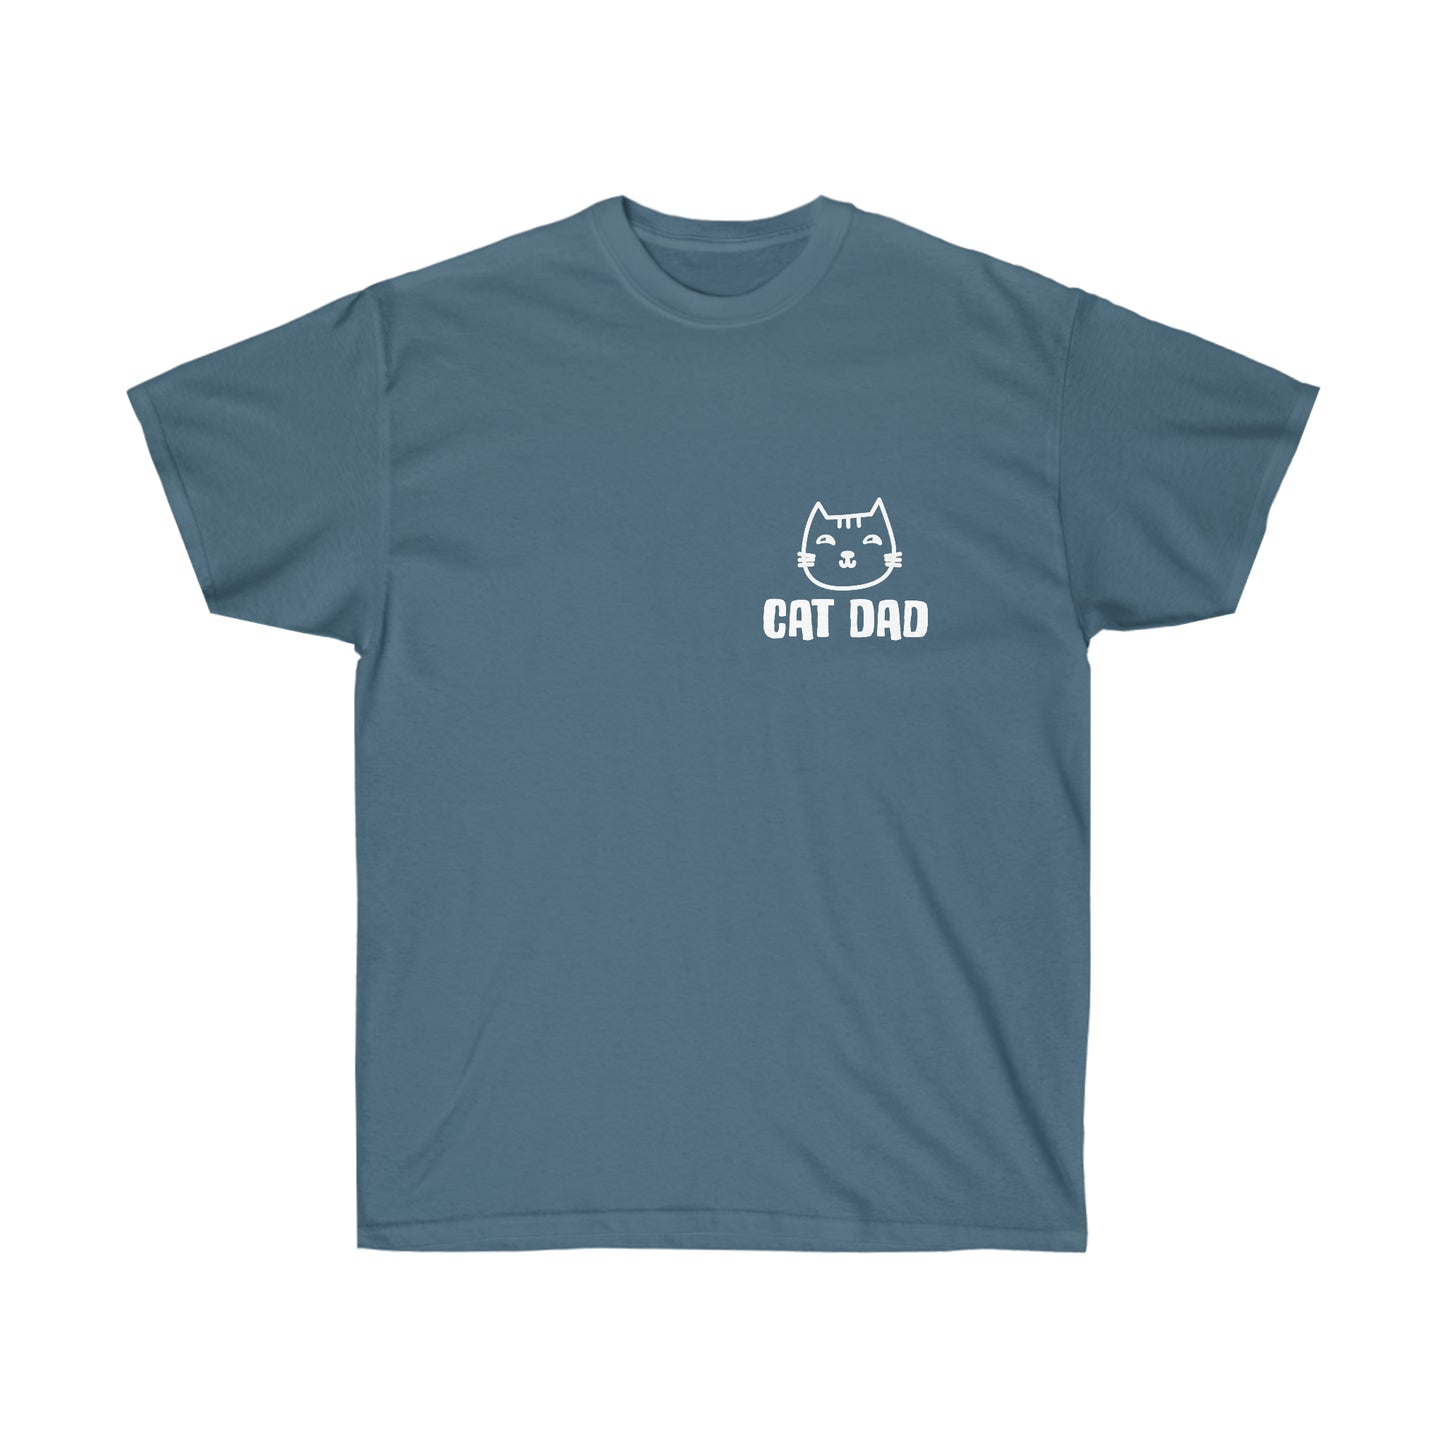 Cat Dad T-Shirt - Proud and Playful Tee for Cat Enthusiasts - Gift for Cat Dads